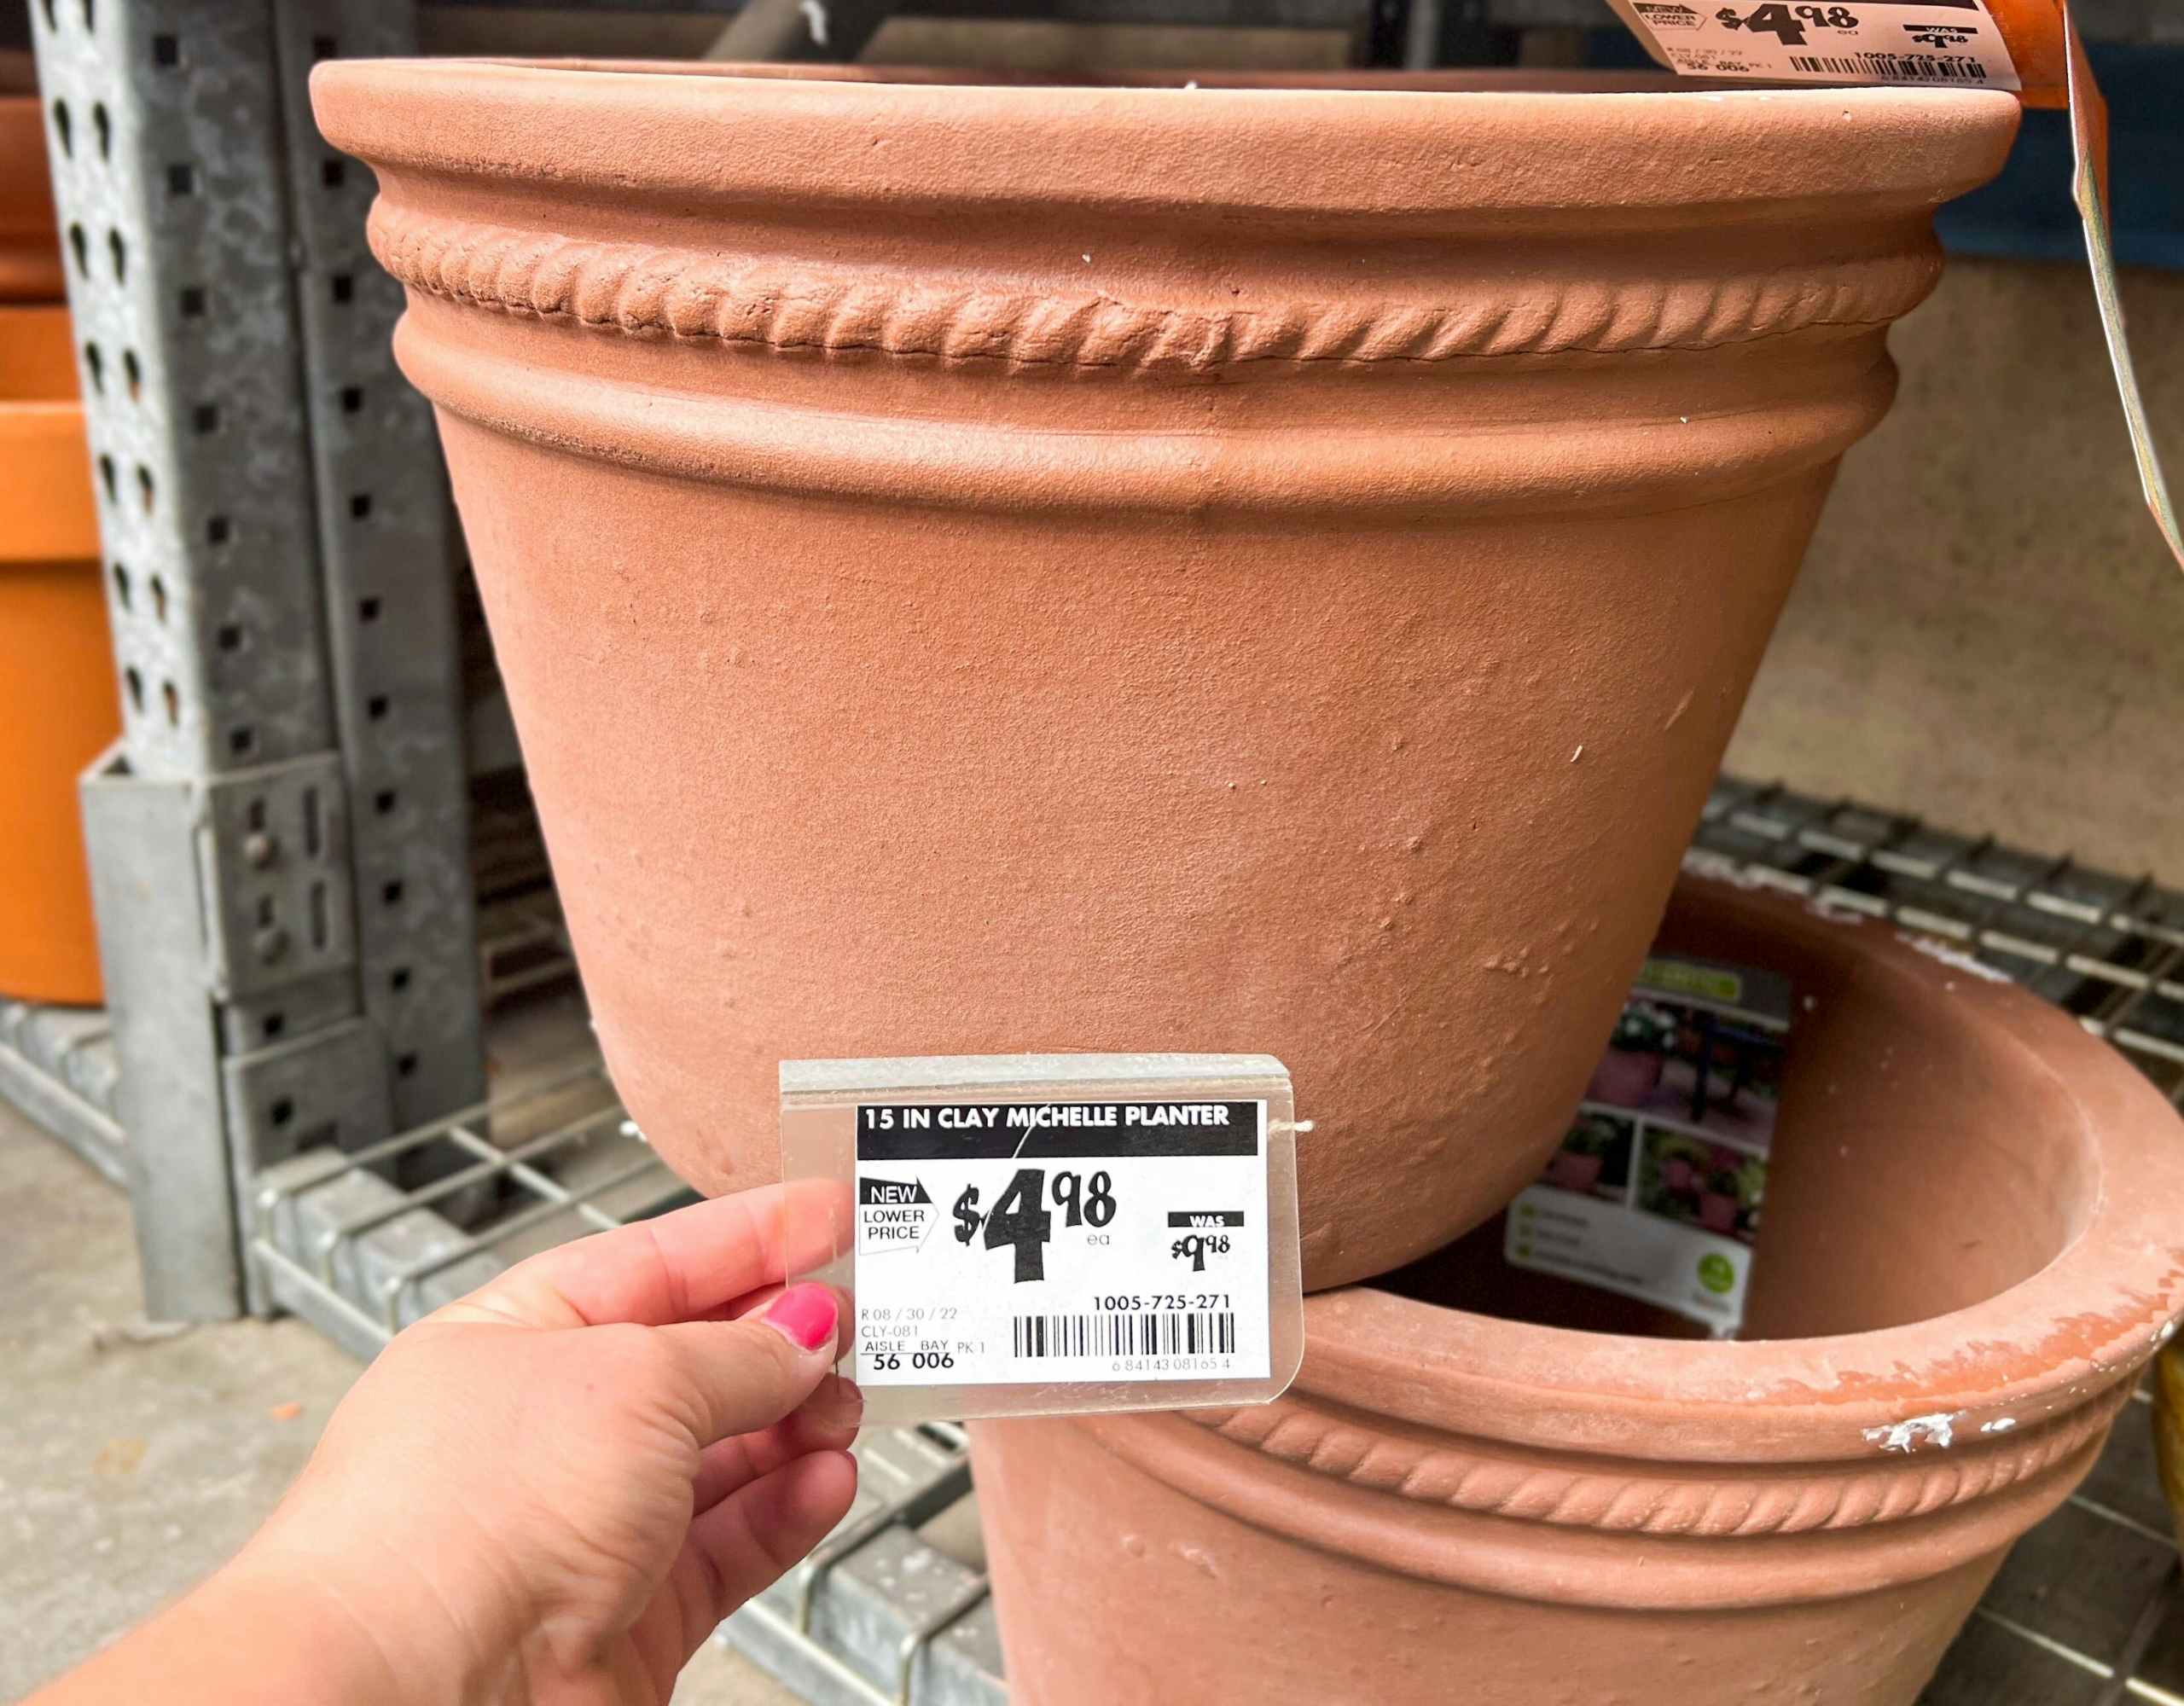 hand holding price tag on southern patio large terra cotta planter at home depot